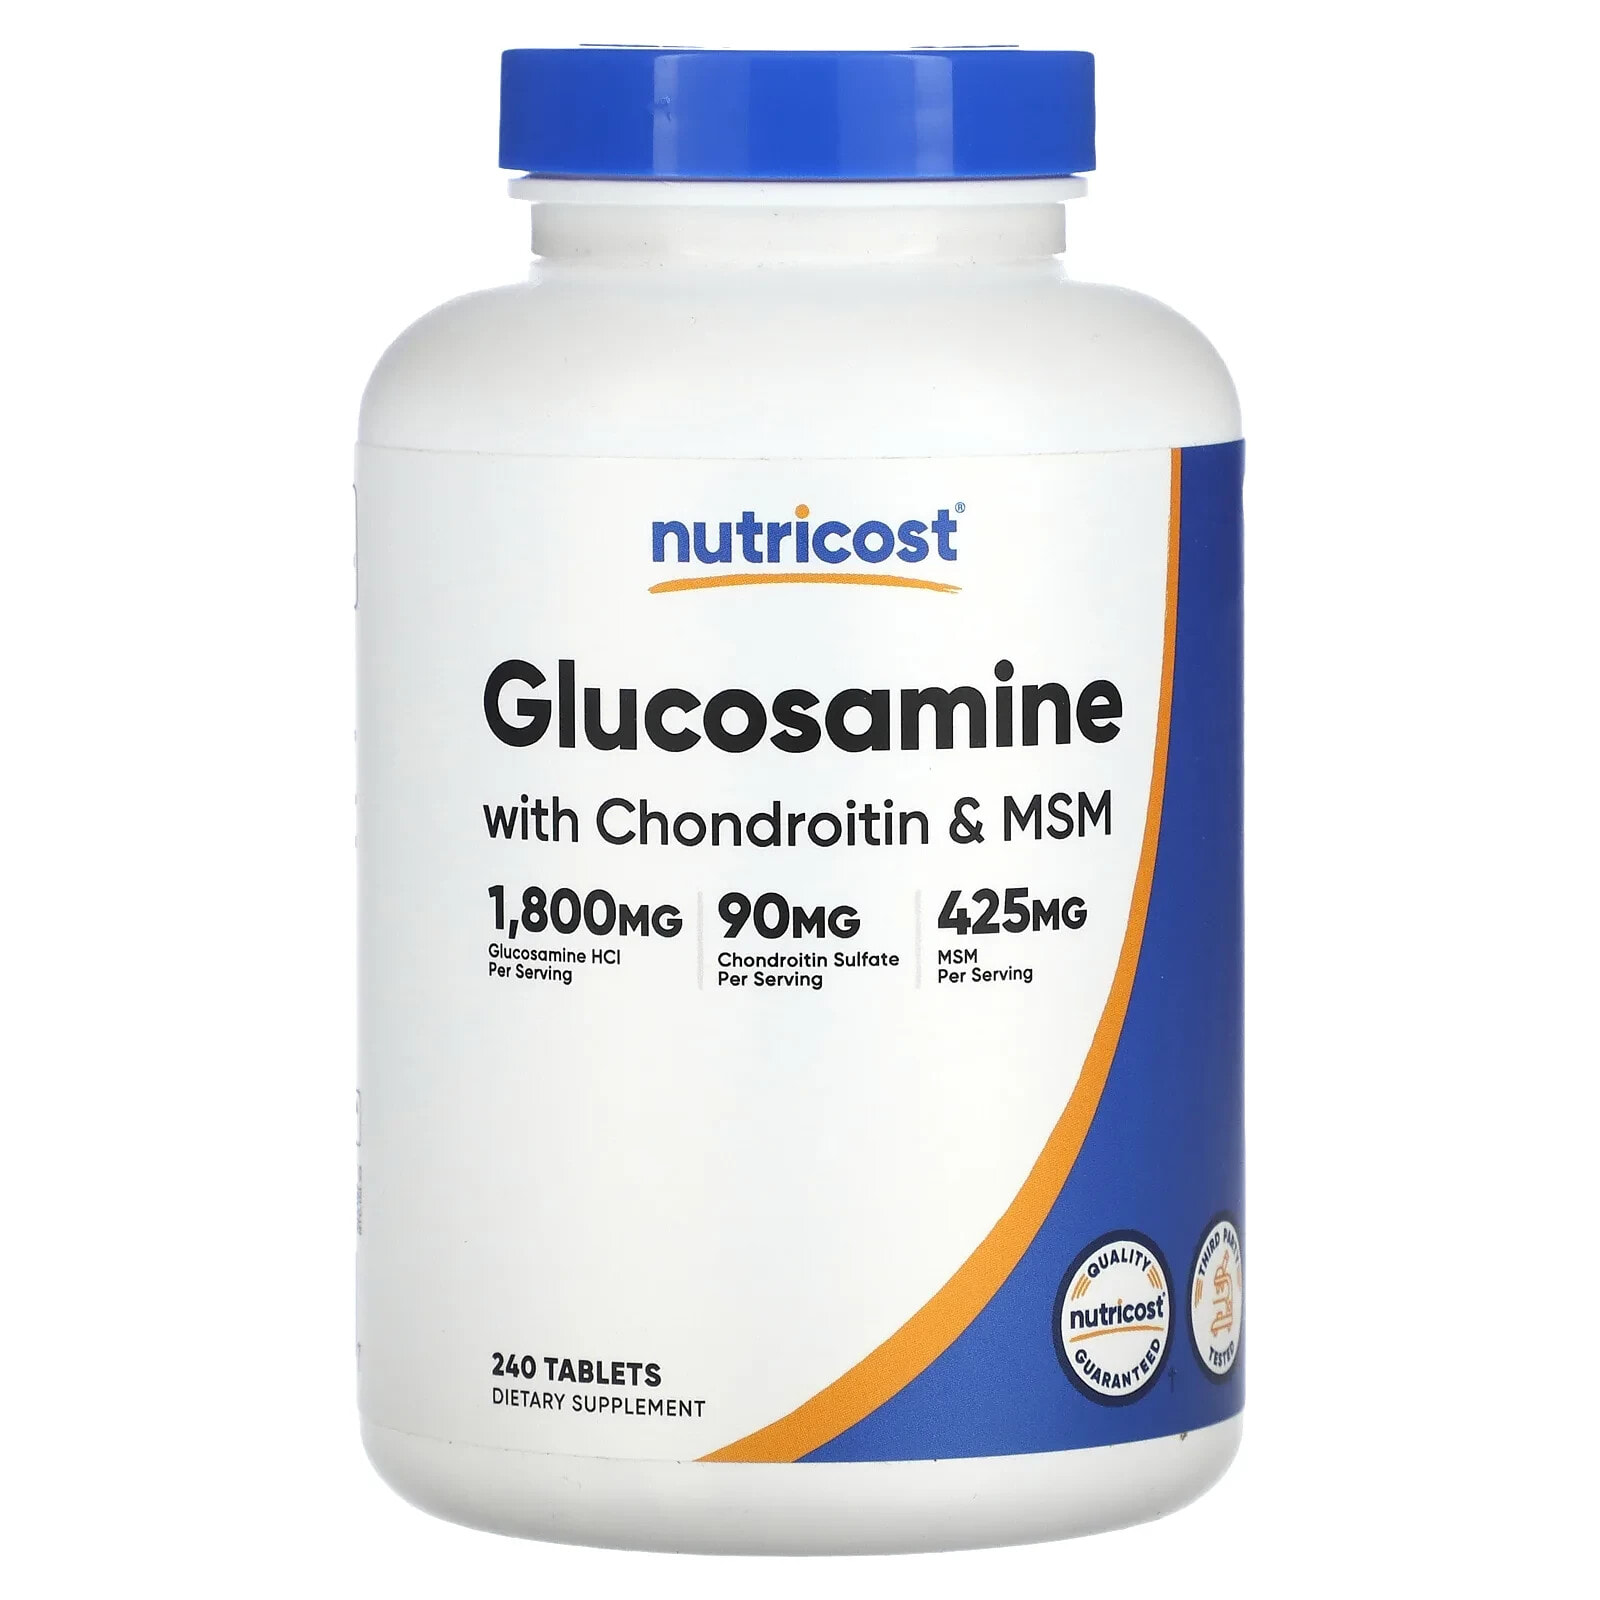 Nutricost, Glucosamine with Chondroitin & MSM, 1,800 mg, 240 Tablets